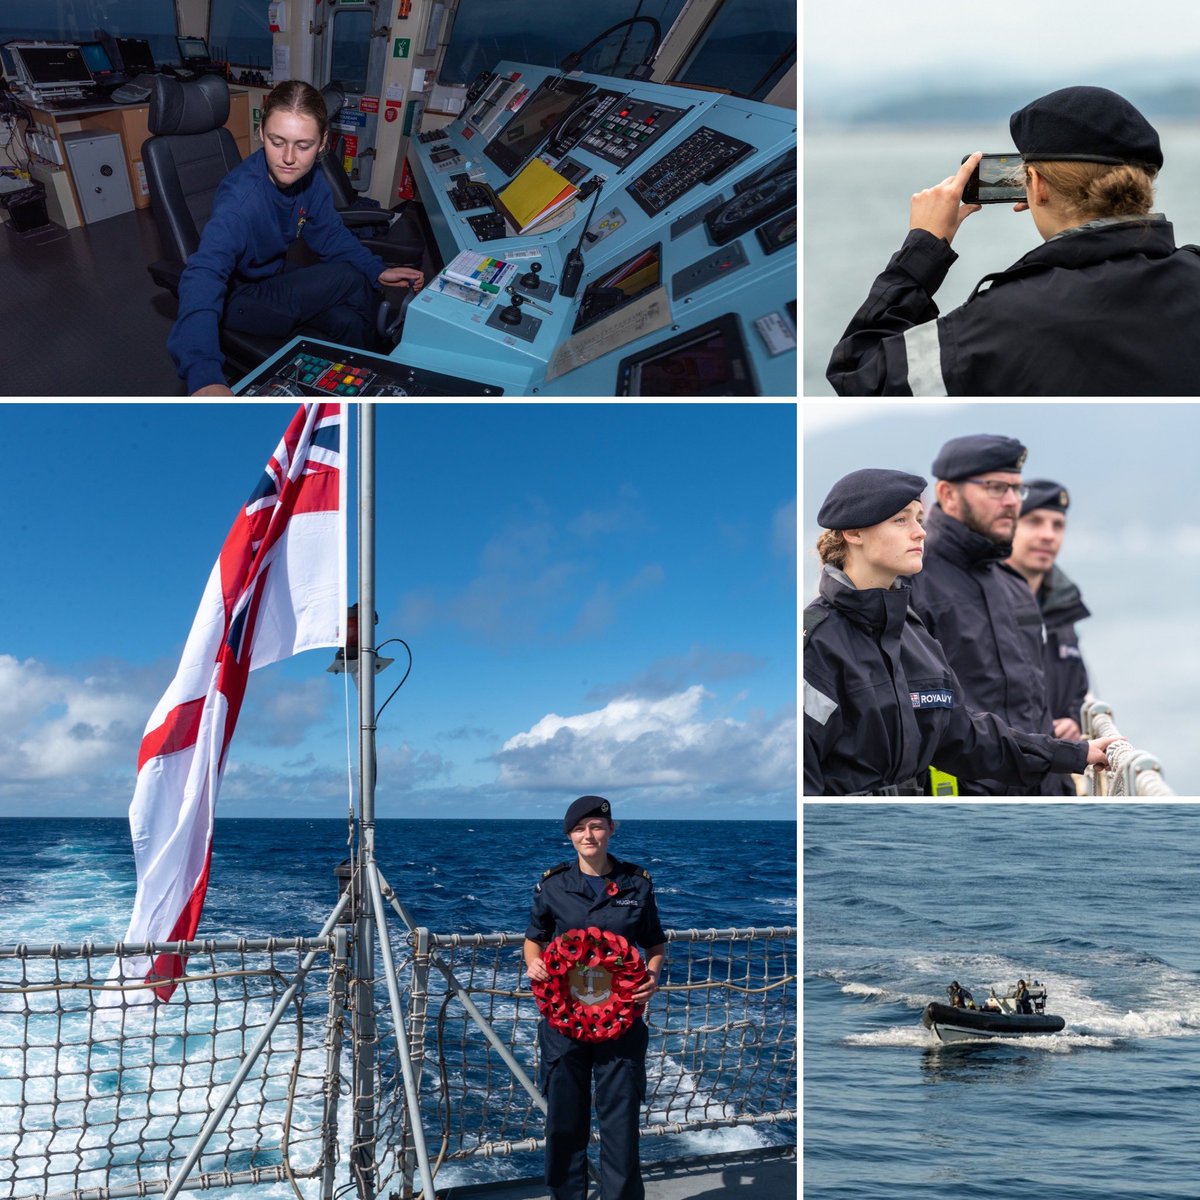 @HMSWILDFIRE’s Reservist AB Amelia Hughes has a paid #gapyear, visiting Singapore, Australia, Indonesia, Philippines and Japan as a member of @HMS_Spey and @OverseasPatrol working alongside @royalnavy and developing new skills at 🌊. #MadeInTheRoyalNavy